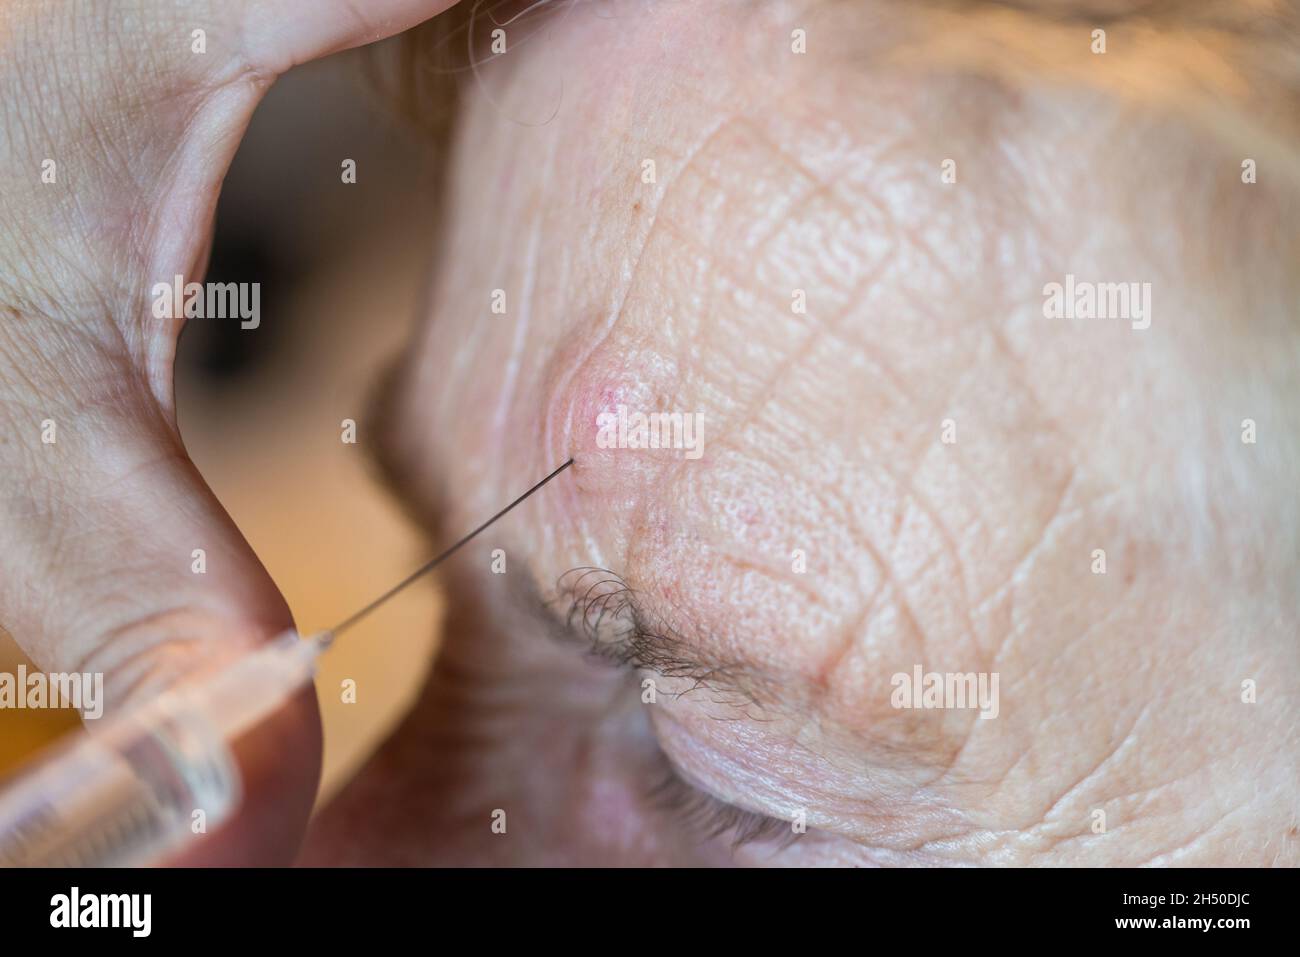 An elderly lady granny gets a medical treatment with needle injection syringe in the forehead with wrinkles , Germany Stock Photo